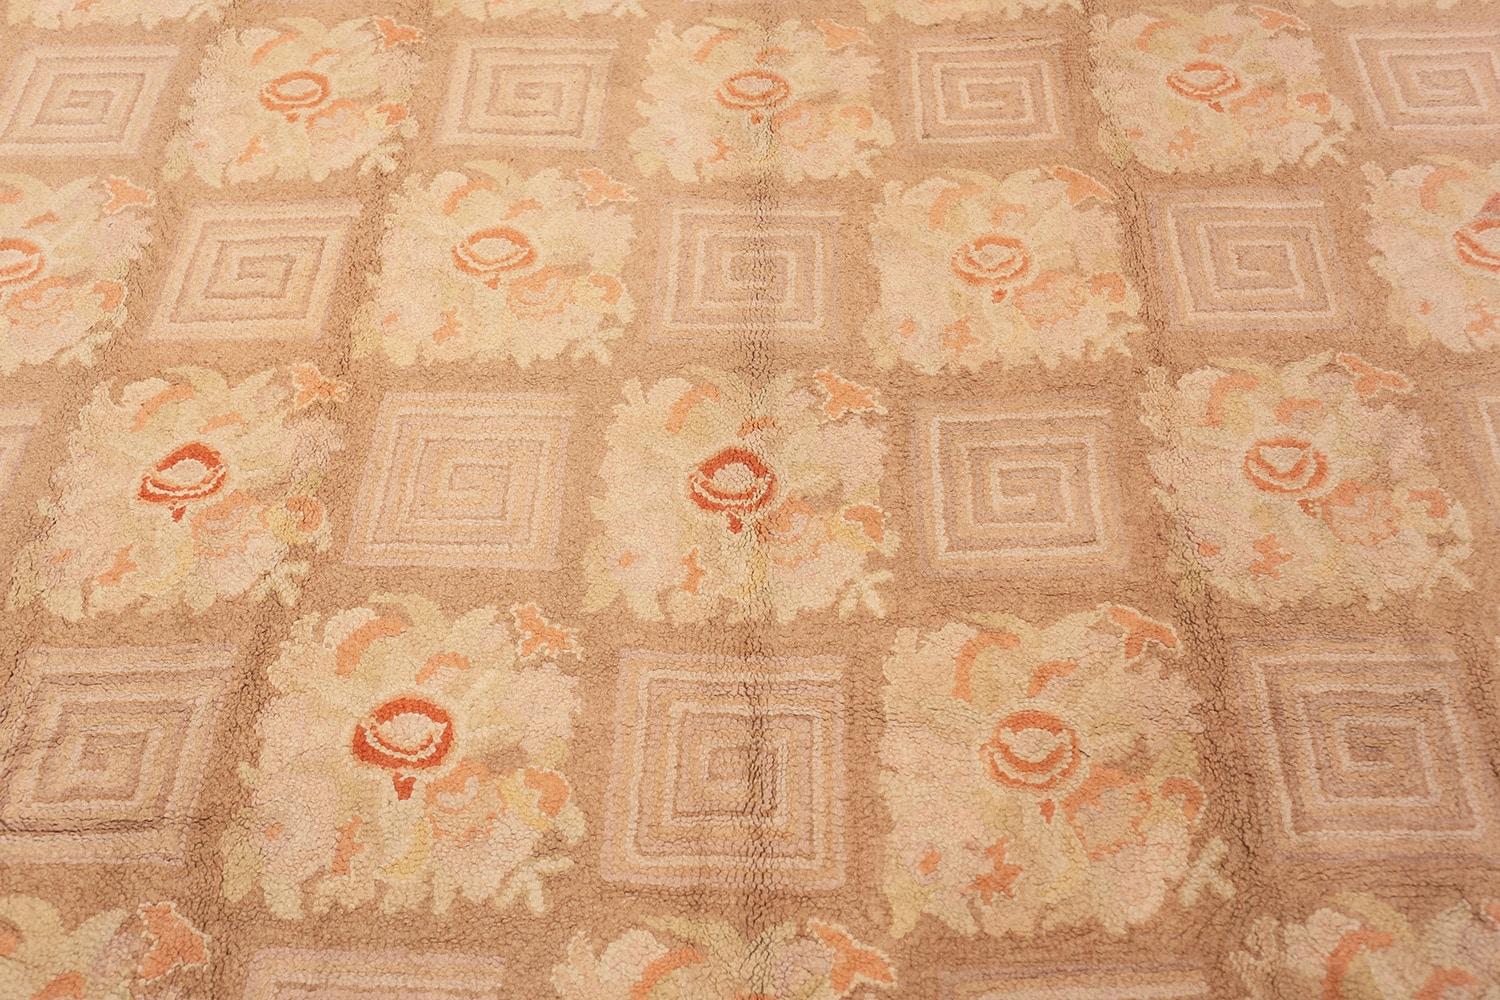 Beautiful room size floral pattern antique American Hooked rug, country of origin: America, date circa early 20th century. Size: 8 ft 9 in x 11 ft 10 in (2.67 m x 3.61 m).

